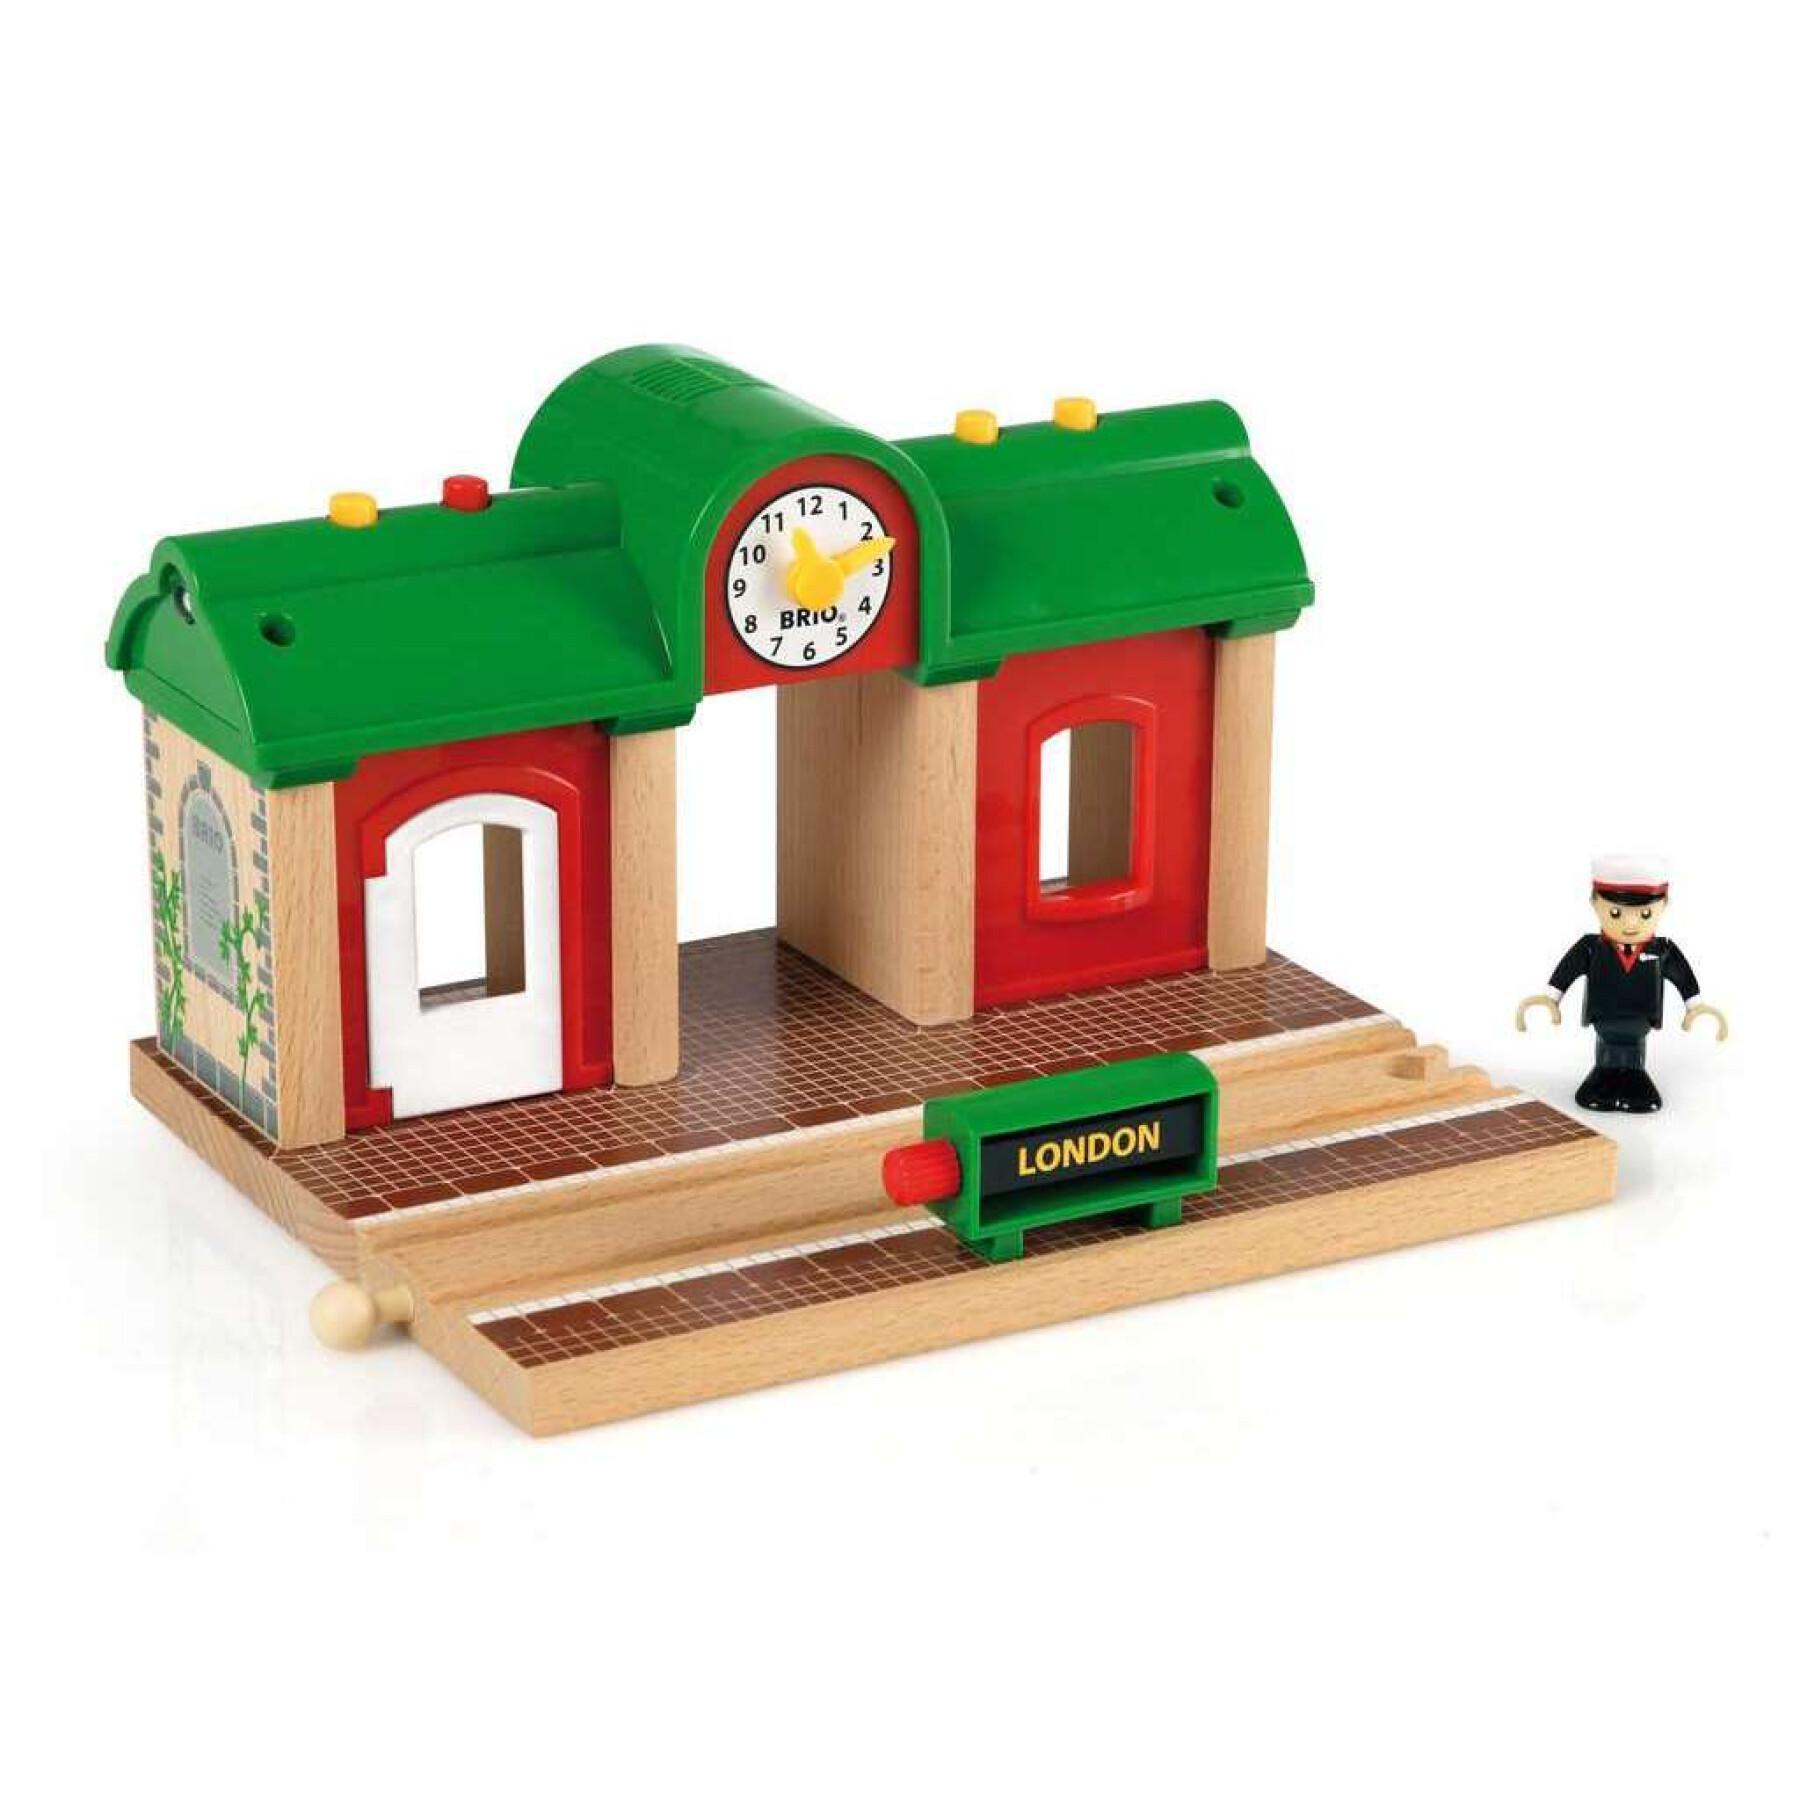 Main station with voice recorder Ravensburger